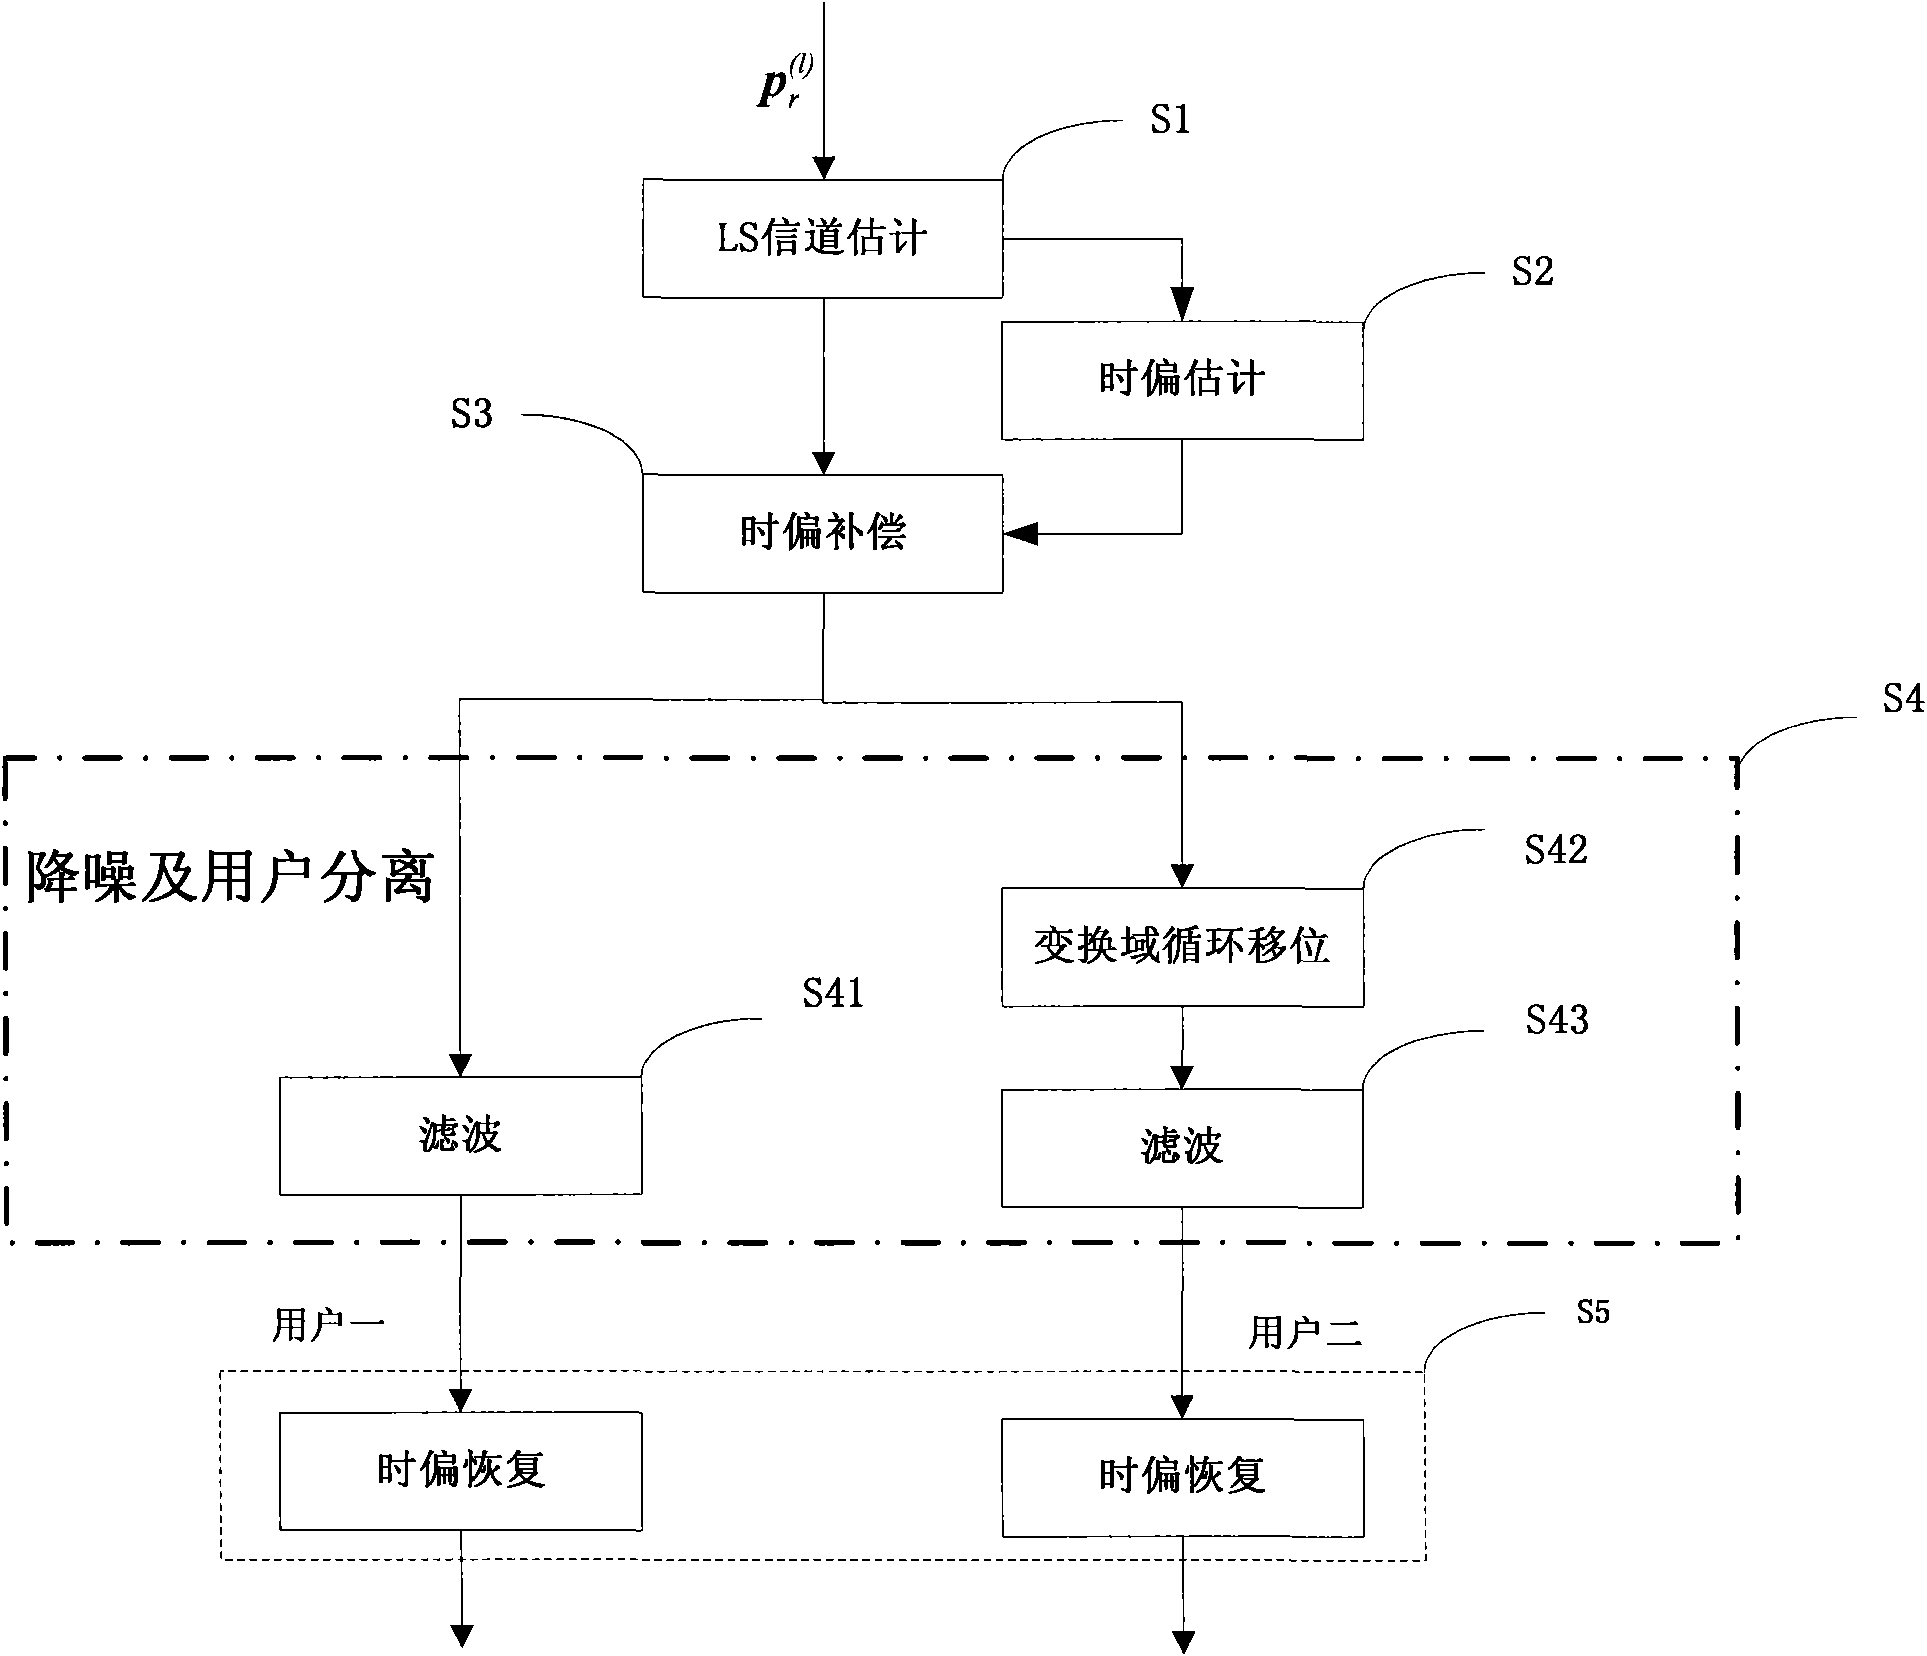 Channel estimation method and device for multi-user multi-input multi-output (MU-MIMO) system